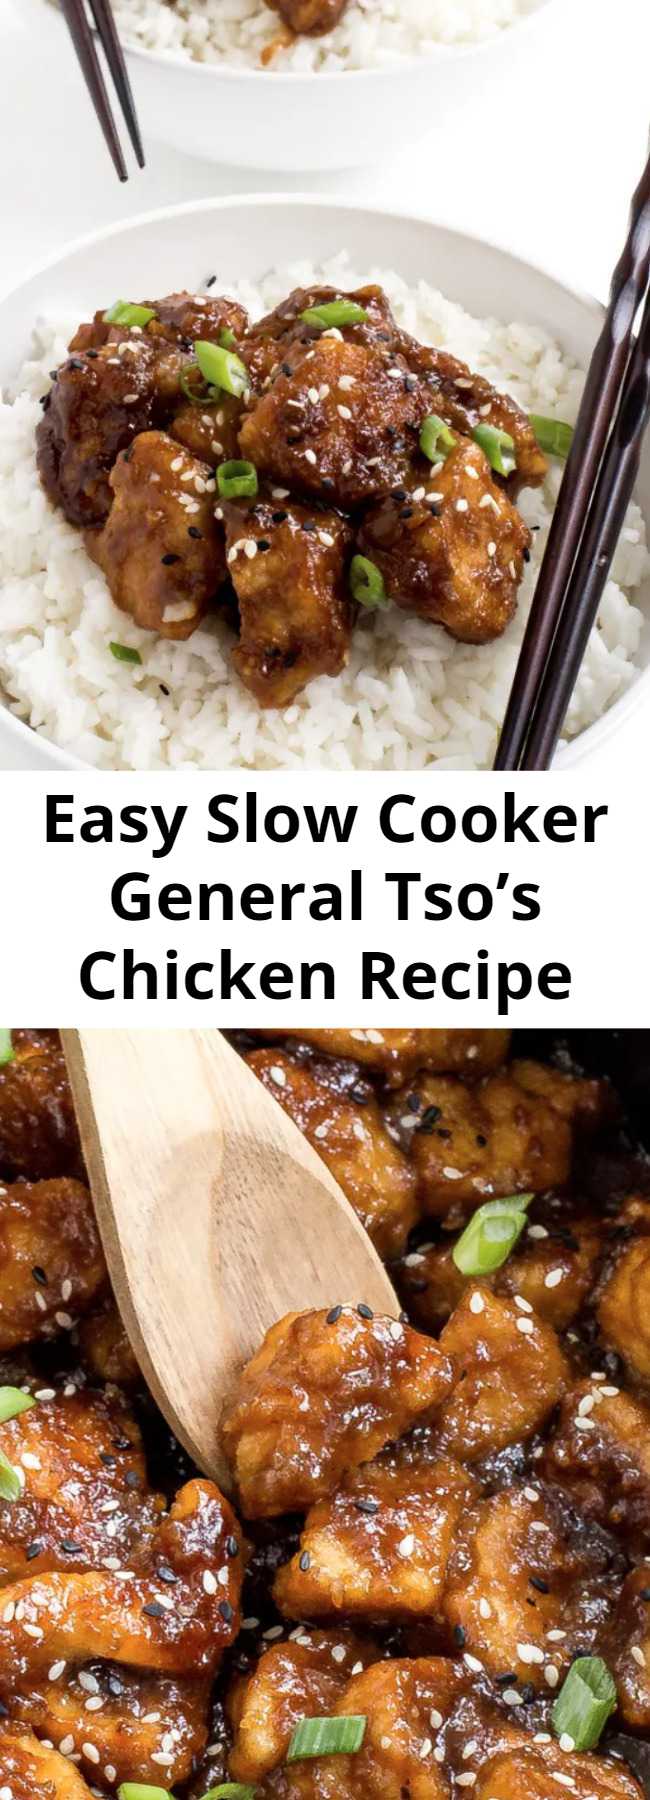 Easy Slow Cooker General Tso’s Chicken Recipe - Super Easy 30 minute General Tso’s Chicken. Pan fried chicken tossed in a sweet and sticky sauce. So much better and healthier than takeout! This recipe is the perfect healthy comfort food anytime of the year. #generaltso #generaltsoschicken #chicken #asianfood #chinese